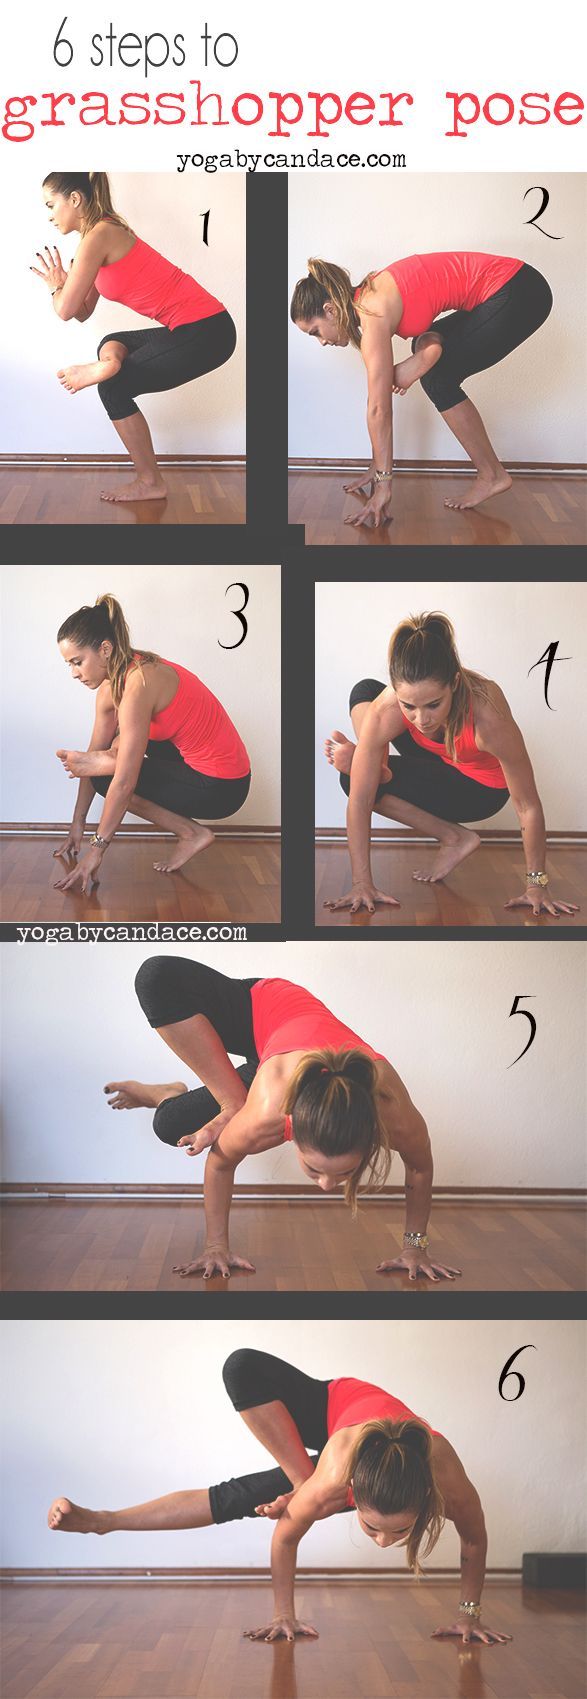 Pin now, practice later! How to do grasshopper pose. Wearing: Zella leggings, Sweaty Betty